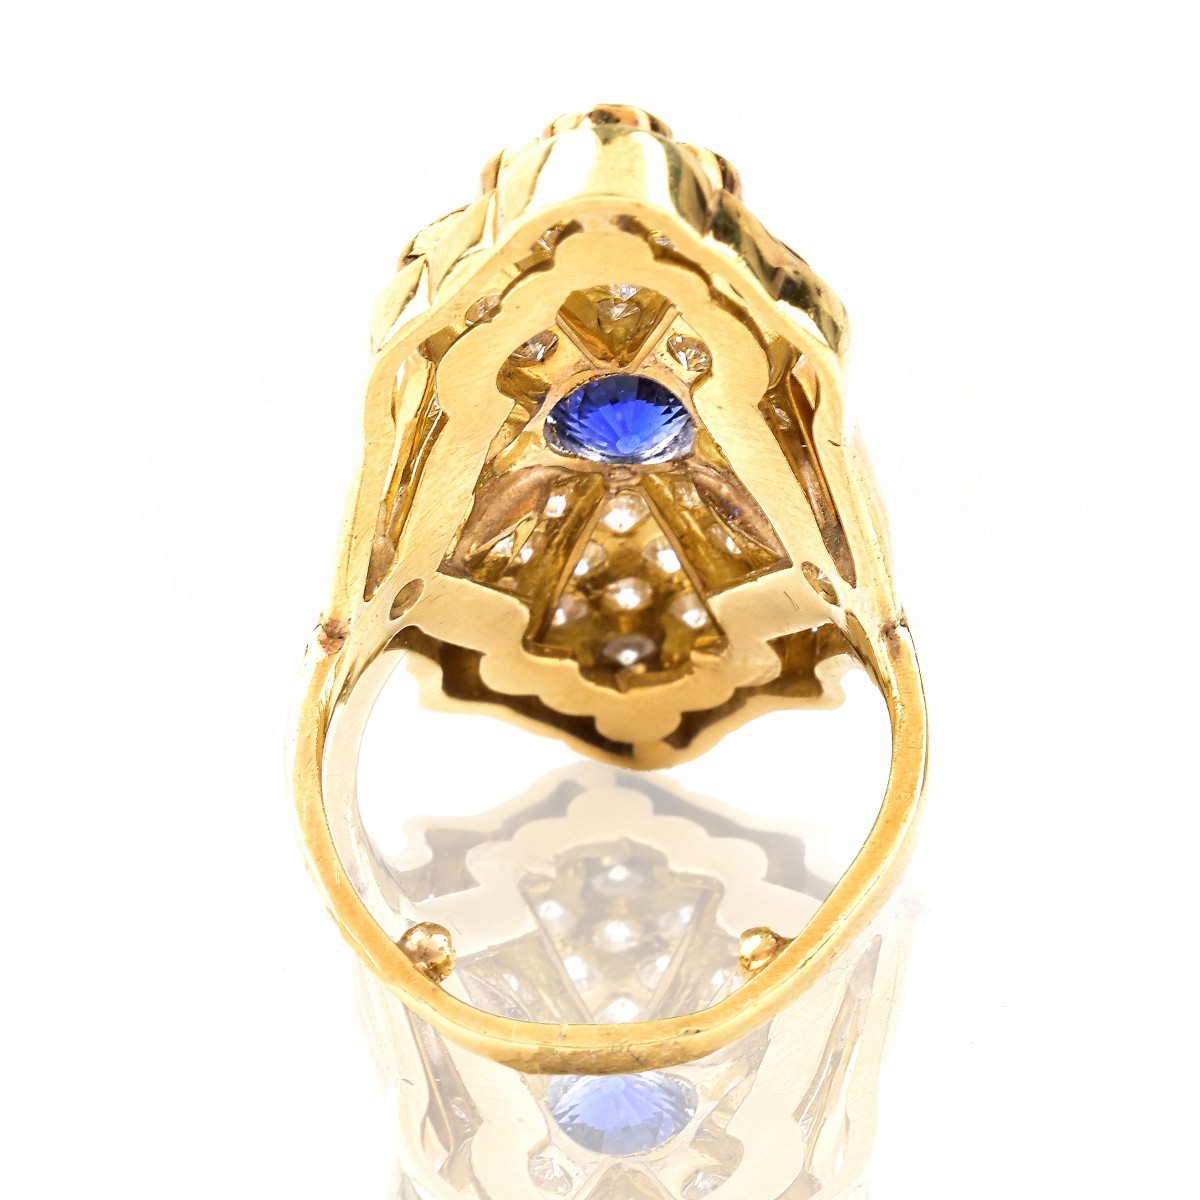 Sapphire, Diamond and 18K Gold Ring.